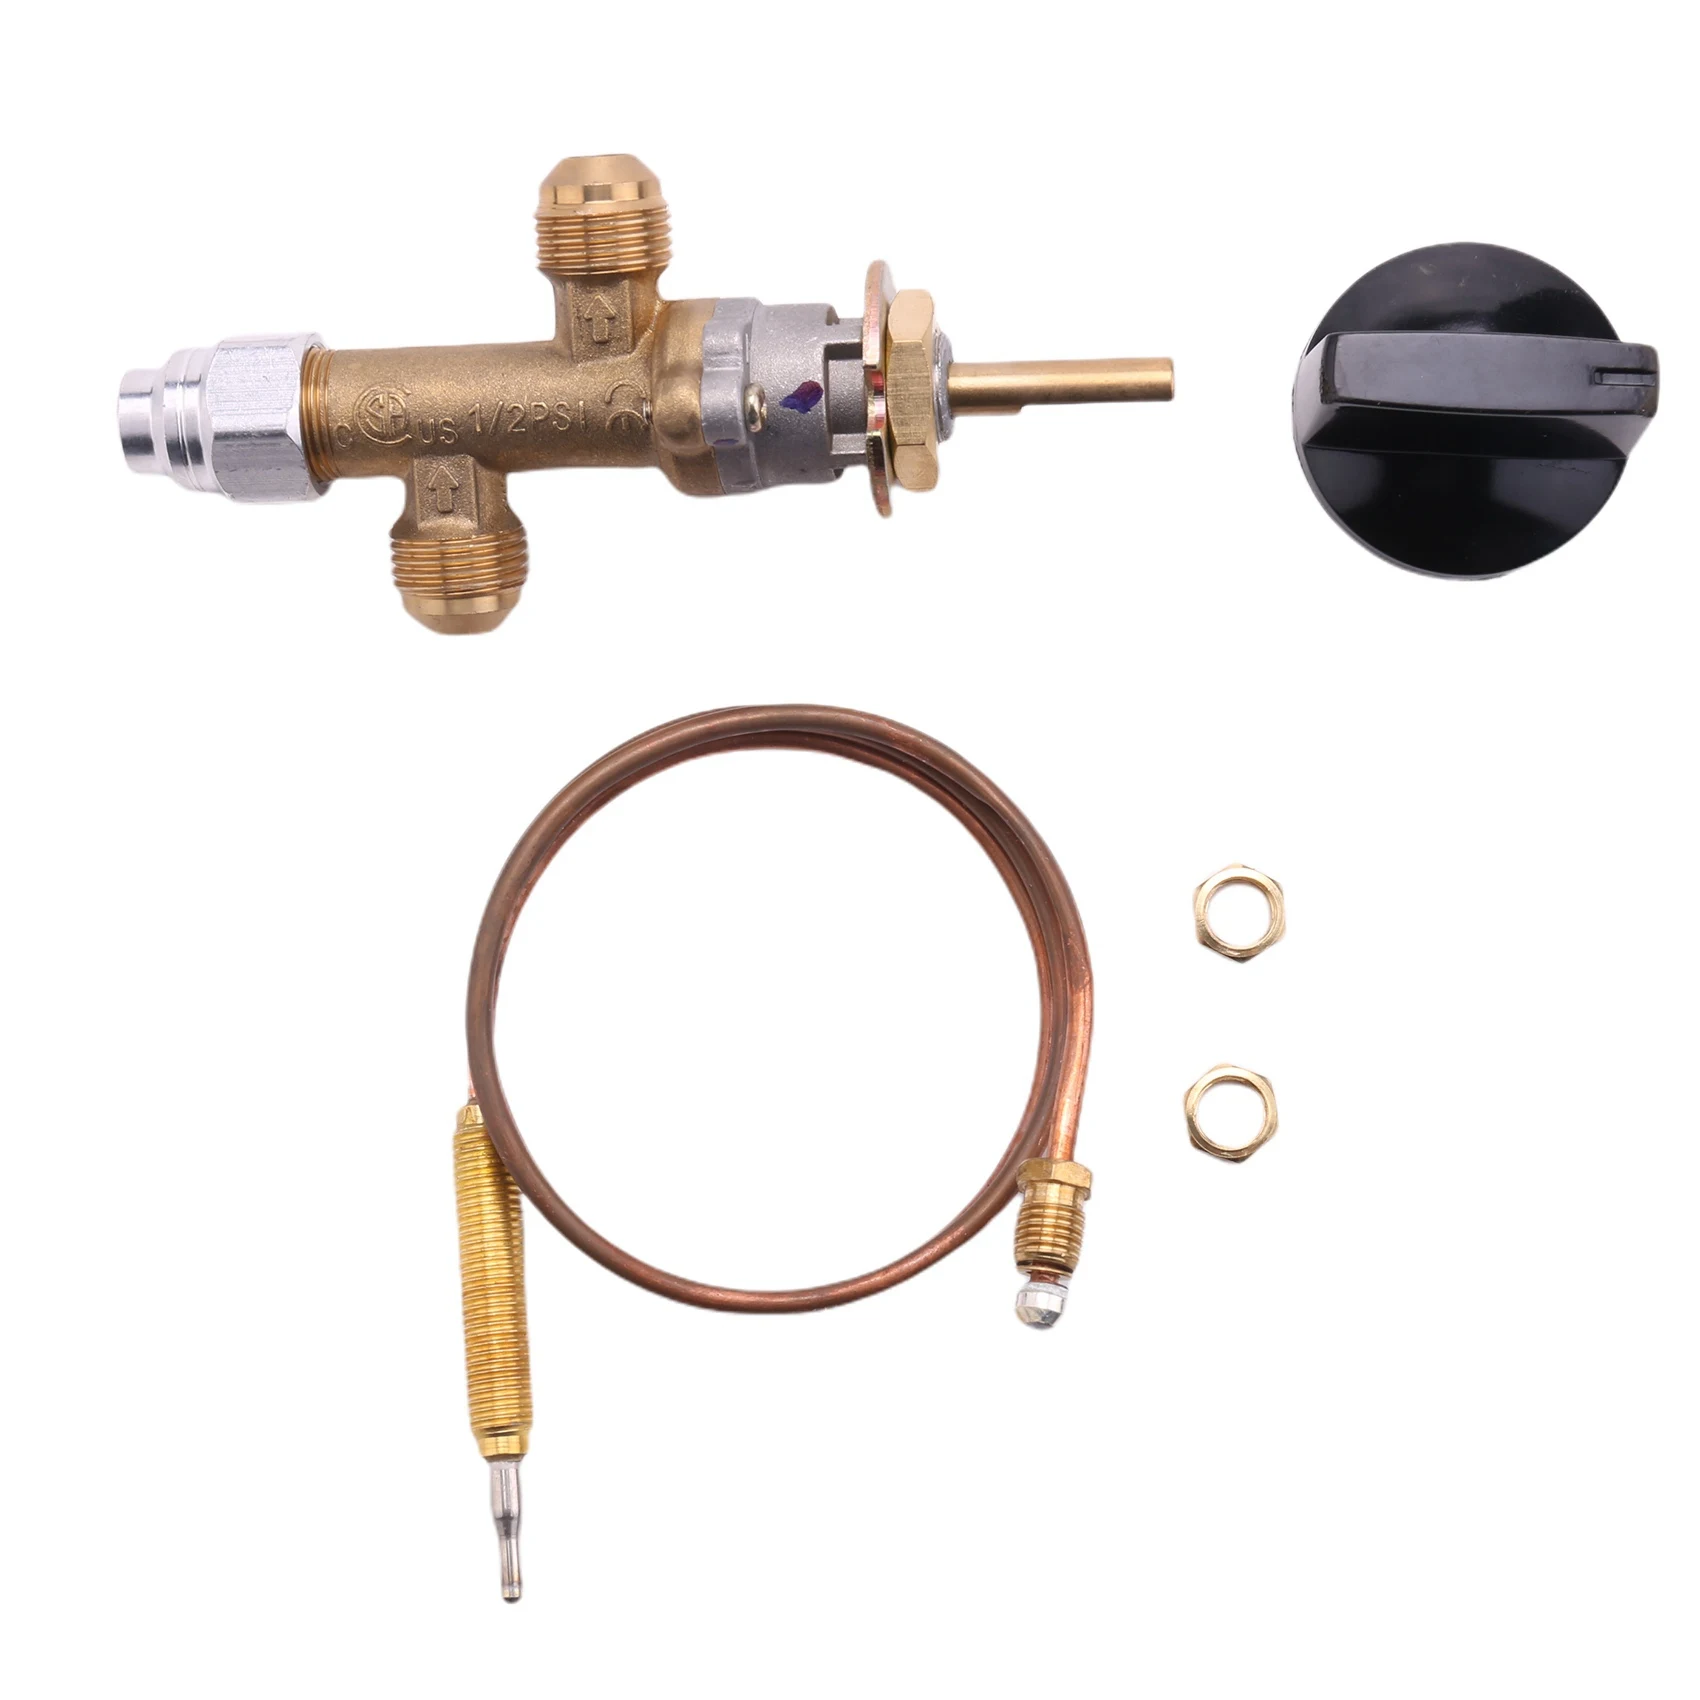 

Propane Lpg Gas Fire Pit Control Safety Valve Flame Failure Device Gas Heater Valve with Thermocouple and Knob